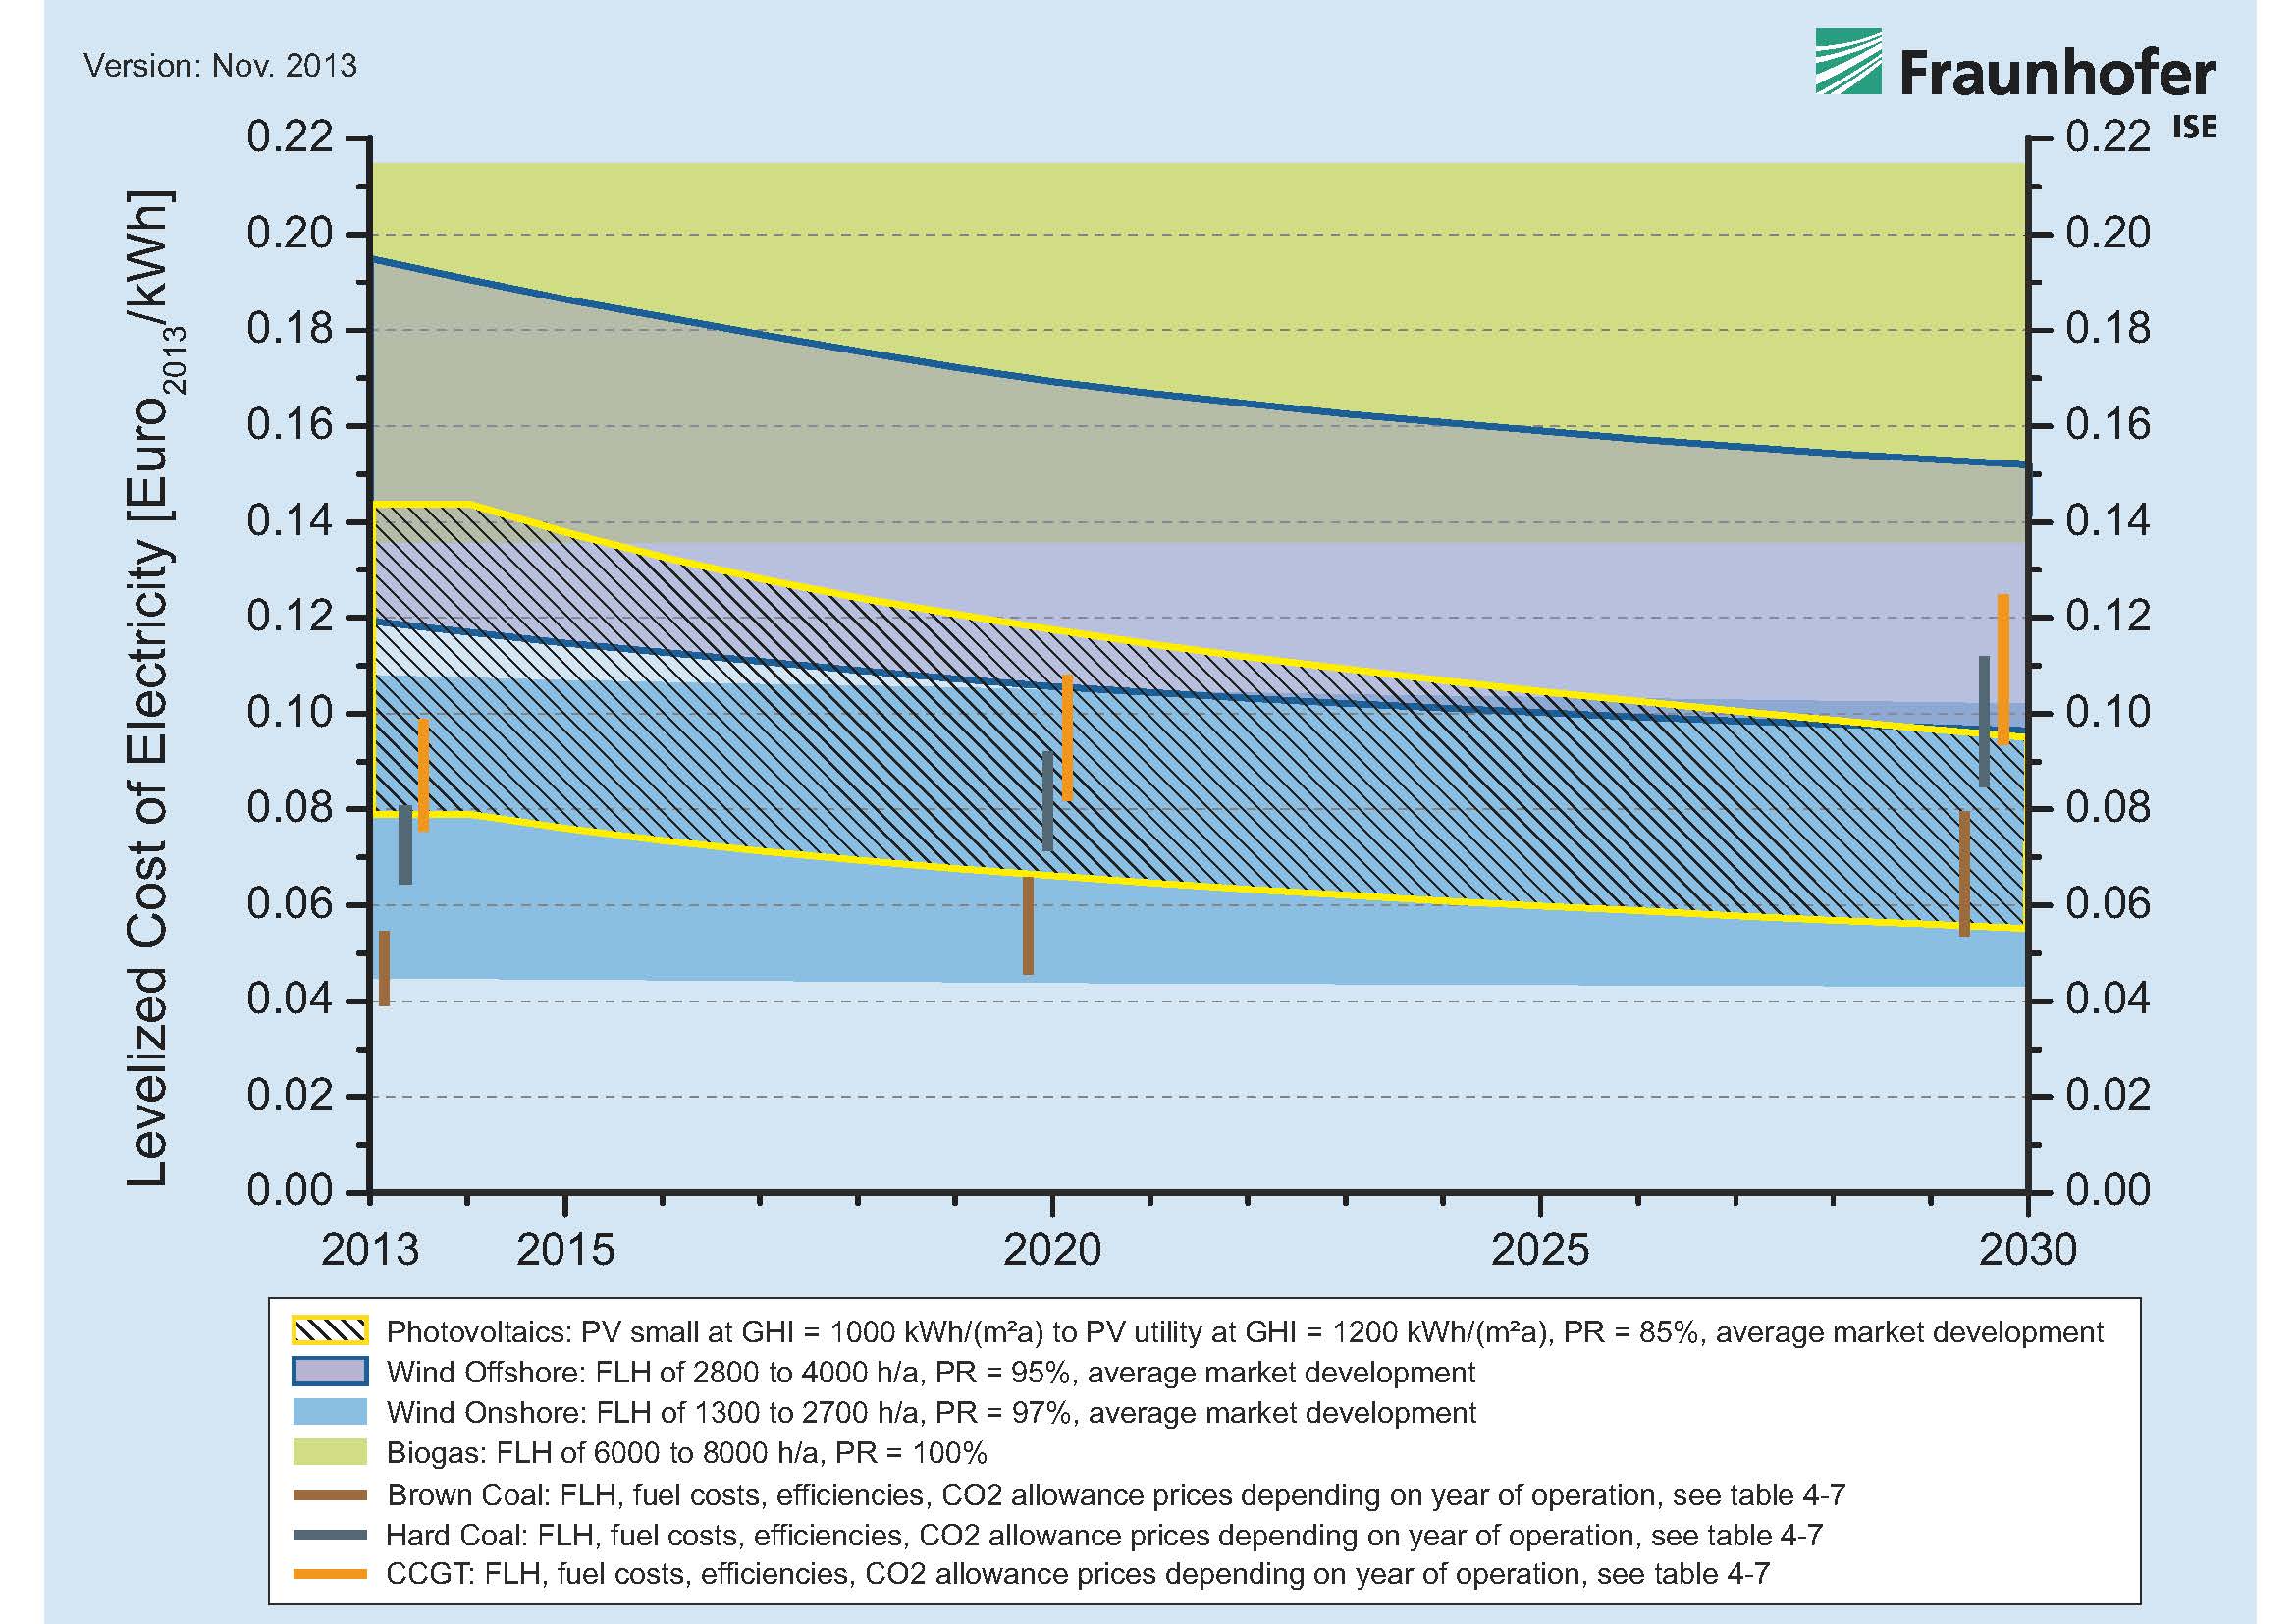 Prognosis of electricity generation costs from renewables and conventional power plants in Germany up to 2030, based on a learning curve analysis. “Electricity Generation Costs from Renewable Energies” (Fraunhofer ISE, November 2013)